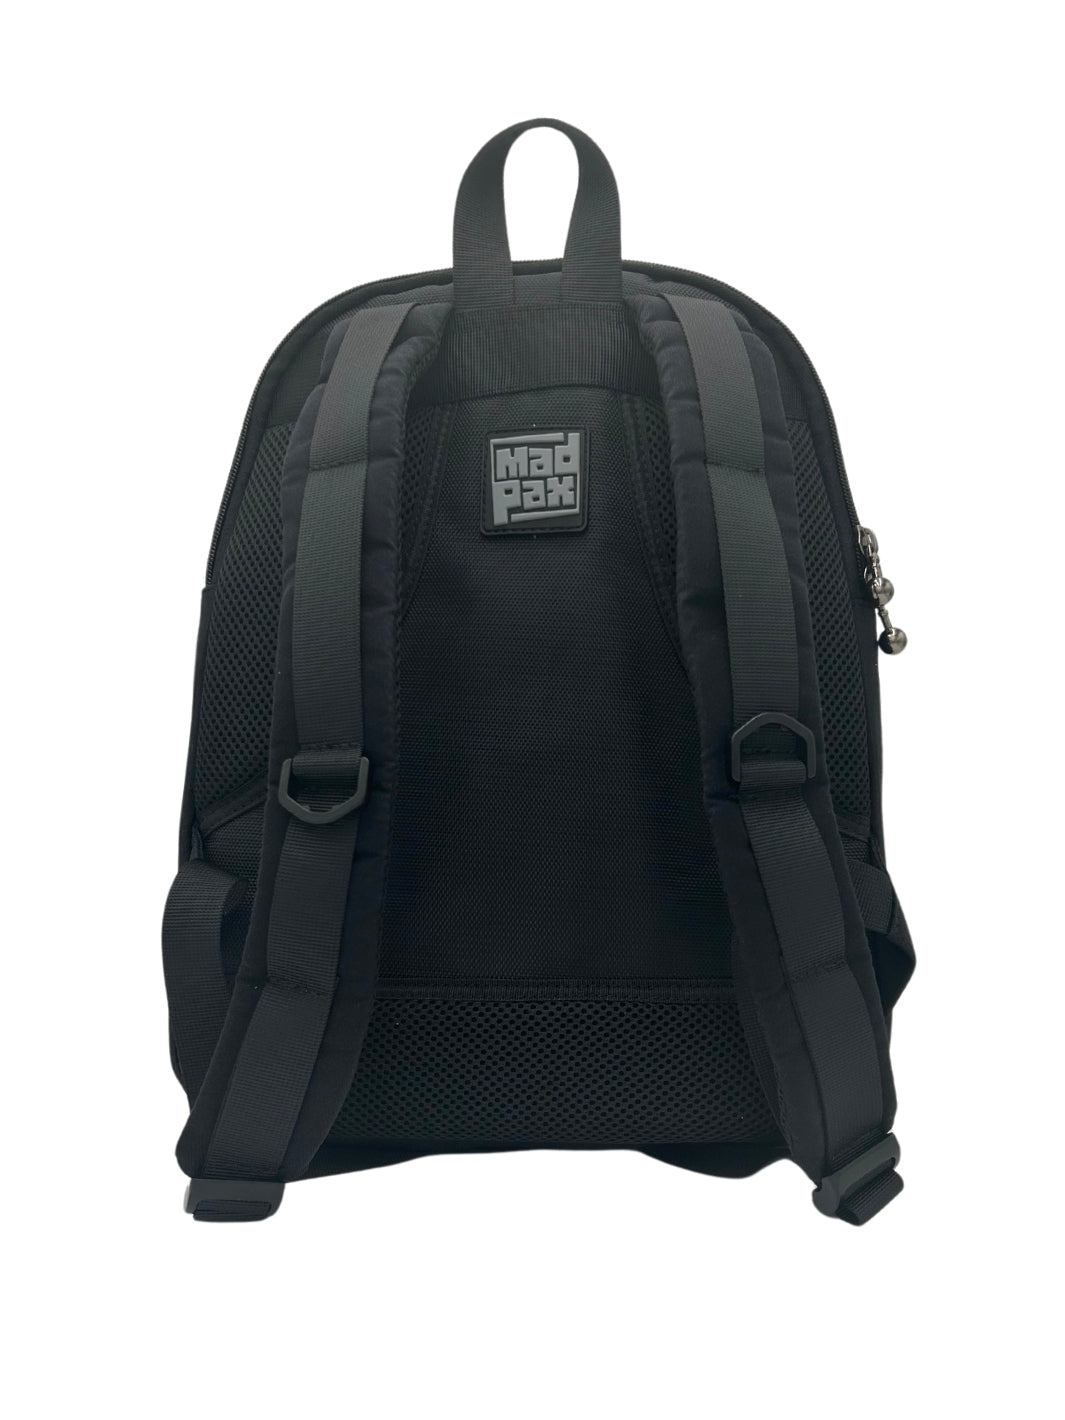 Black Daypack | Eclipse by Madapx Back View